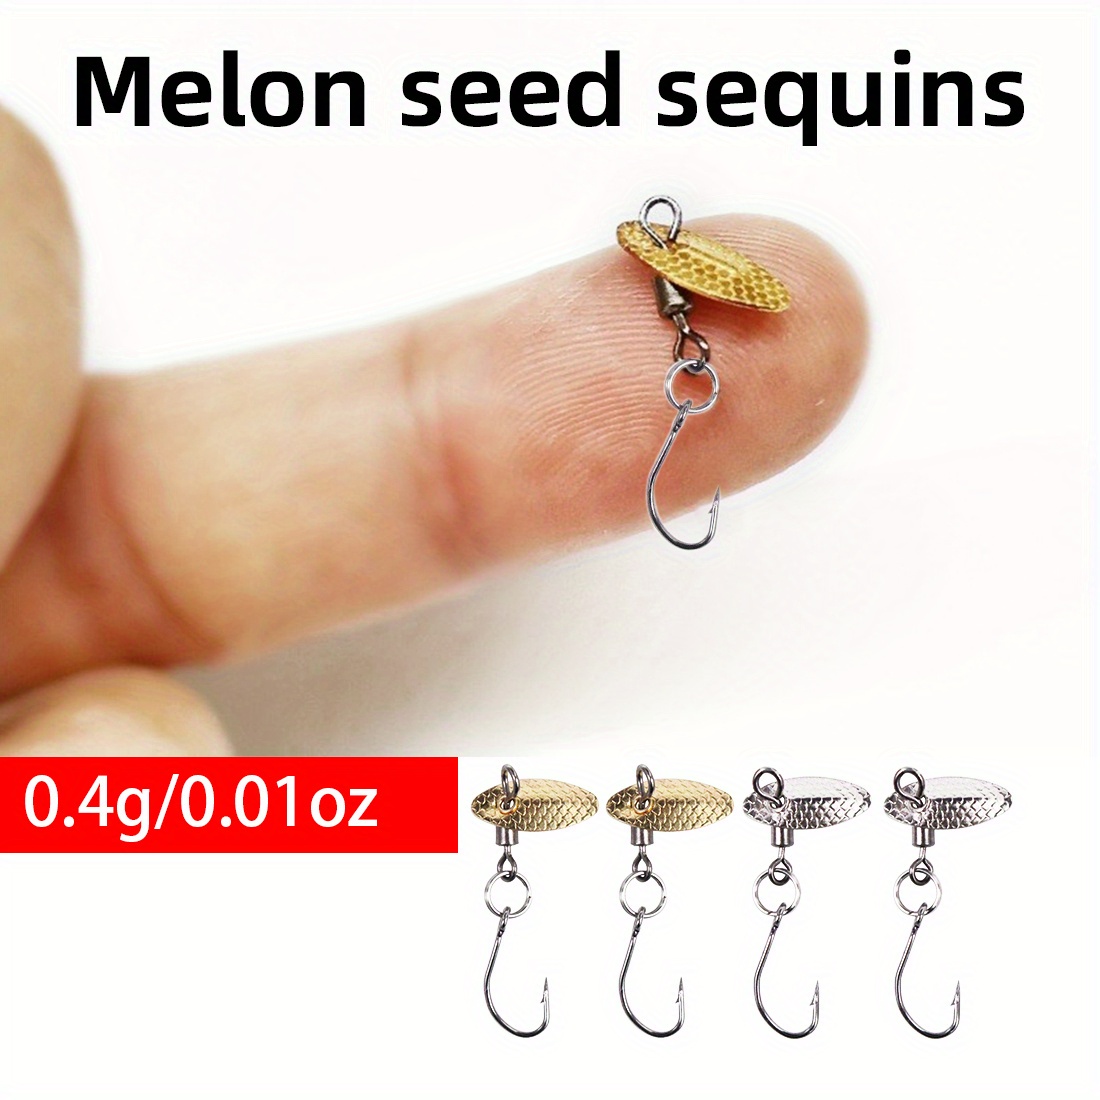 10pcs Premium Spinnerbait Fishing Lure with Ball Bearing Swivel and Fish  Hook - Perfect for Catching More Fish